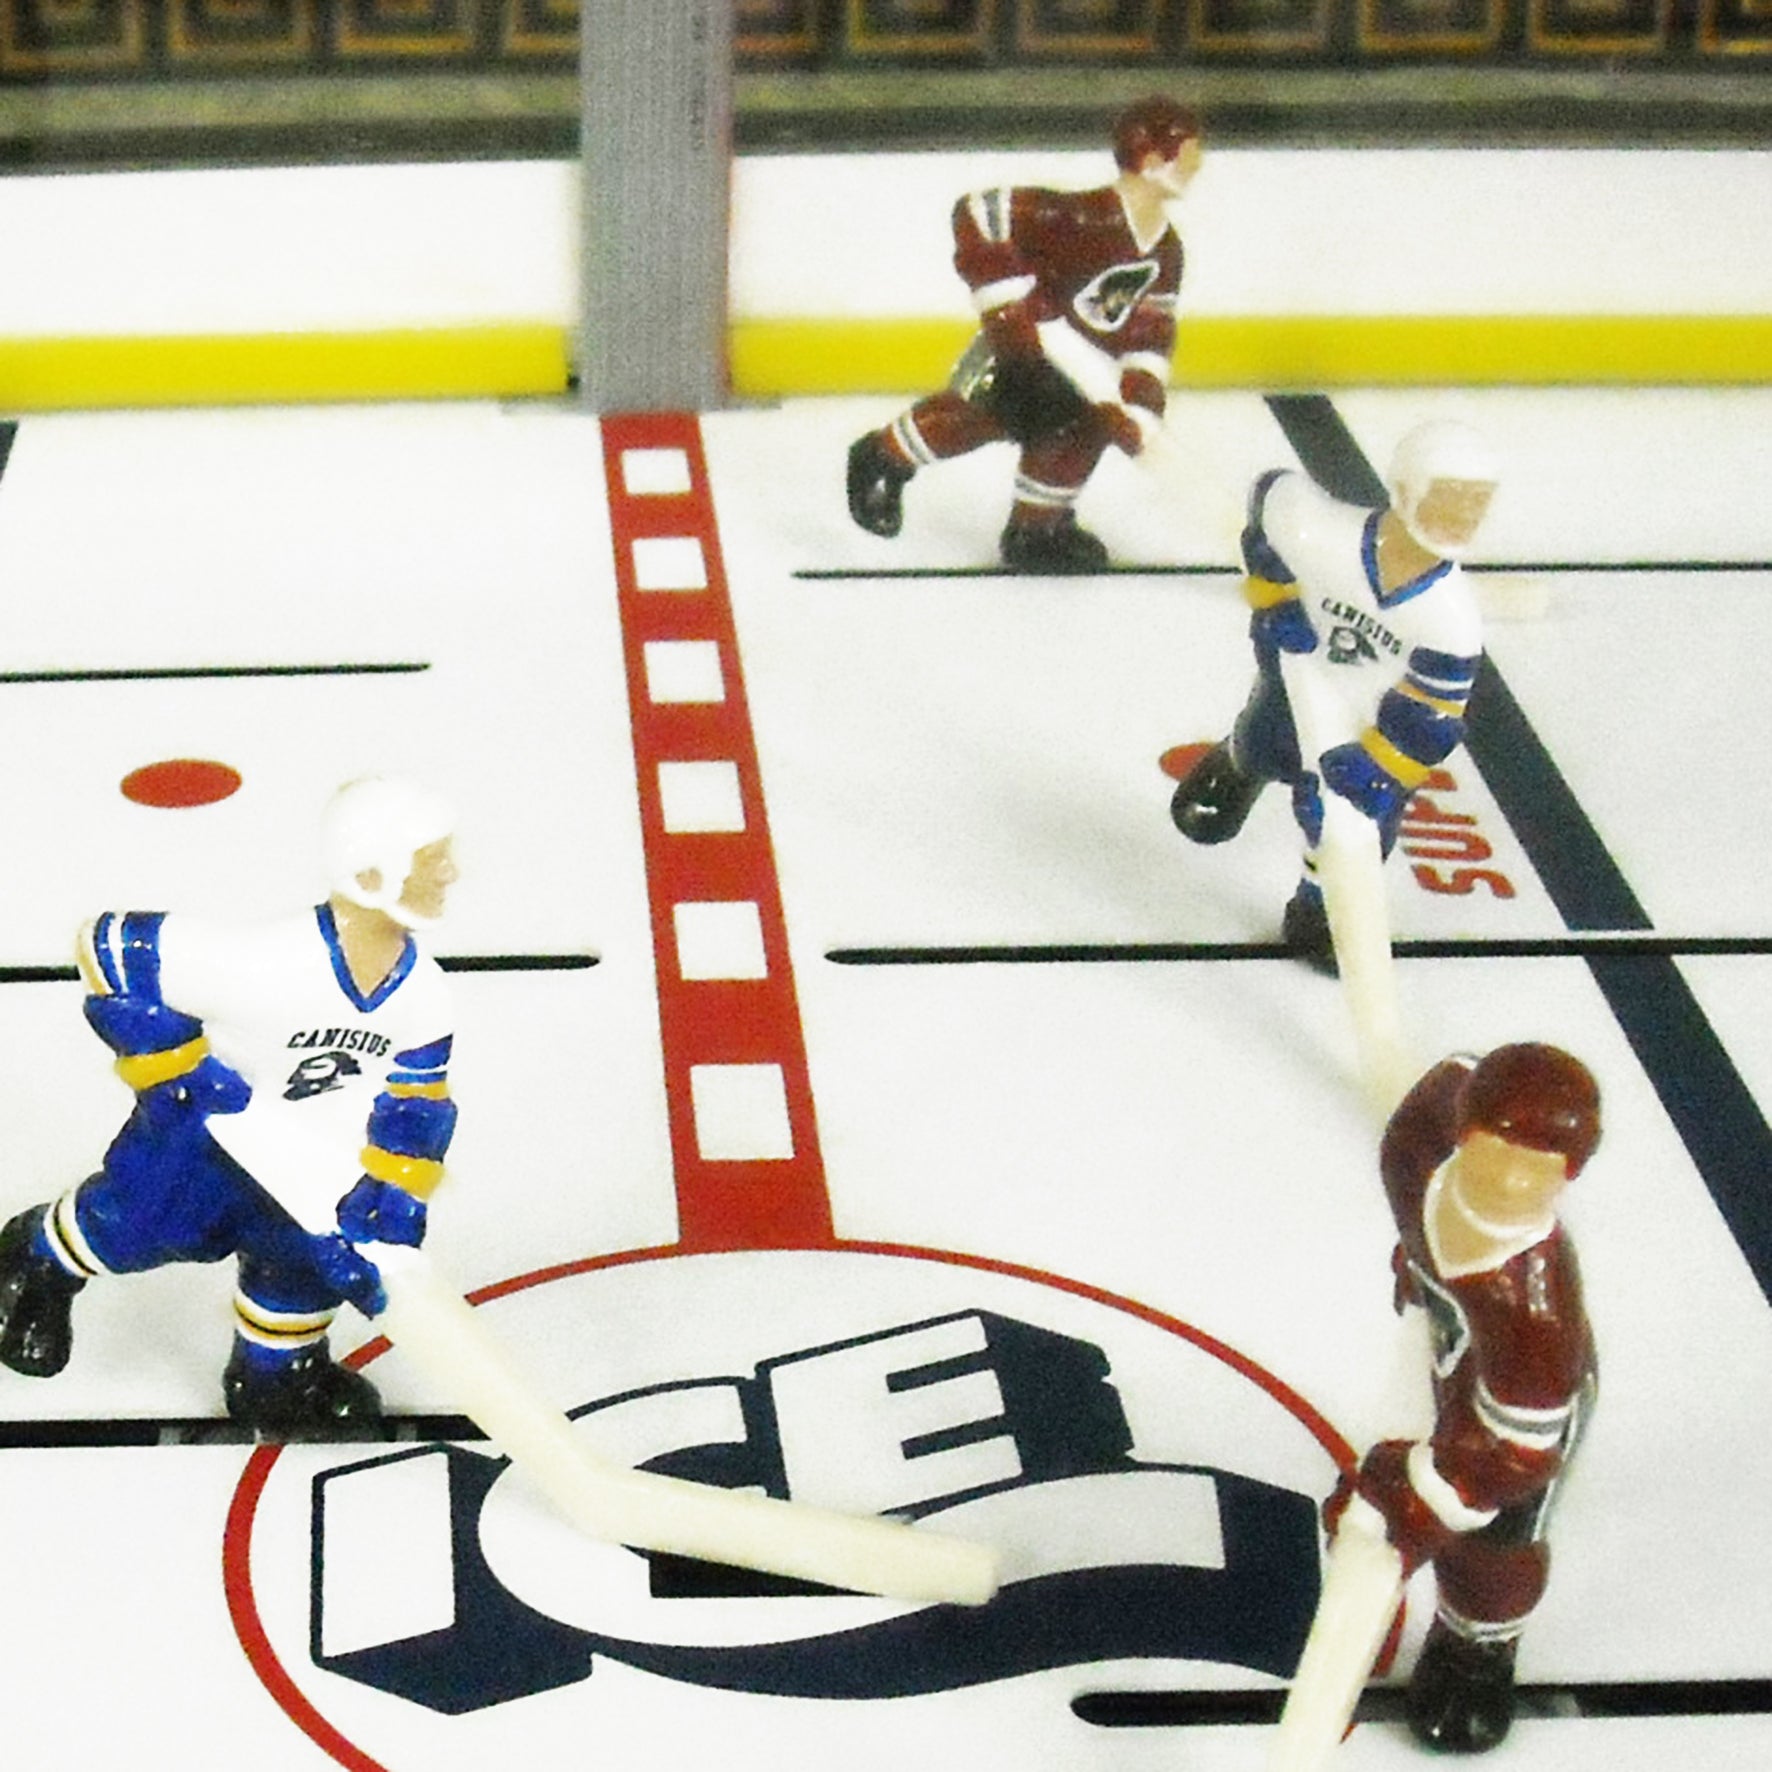 Super Chexx Pro Ice Hockey Game by ICE